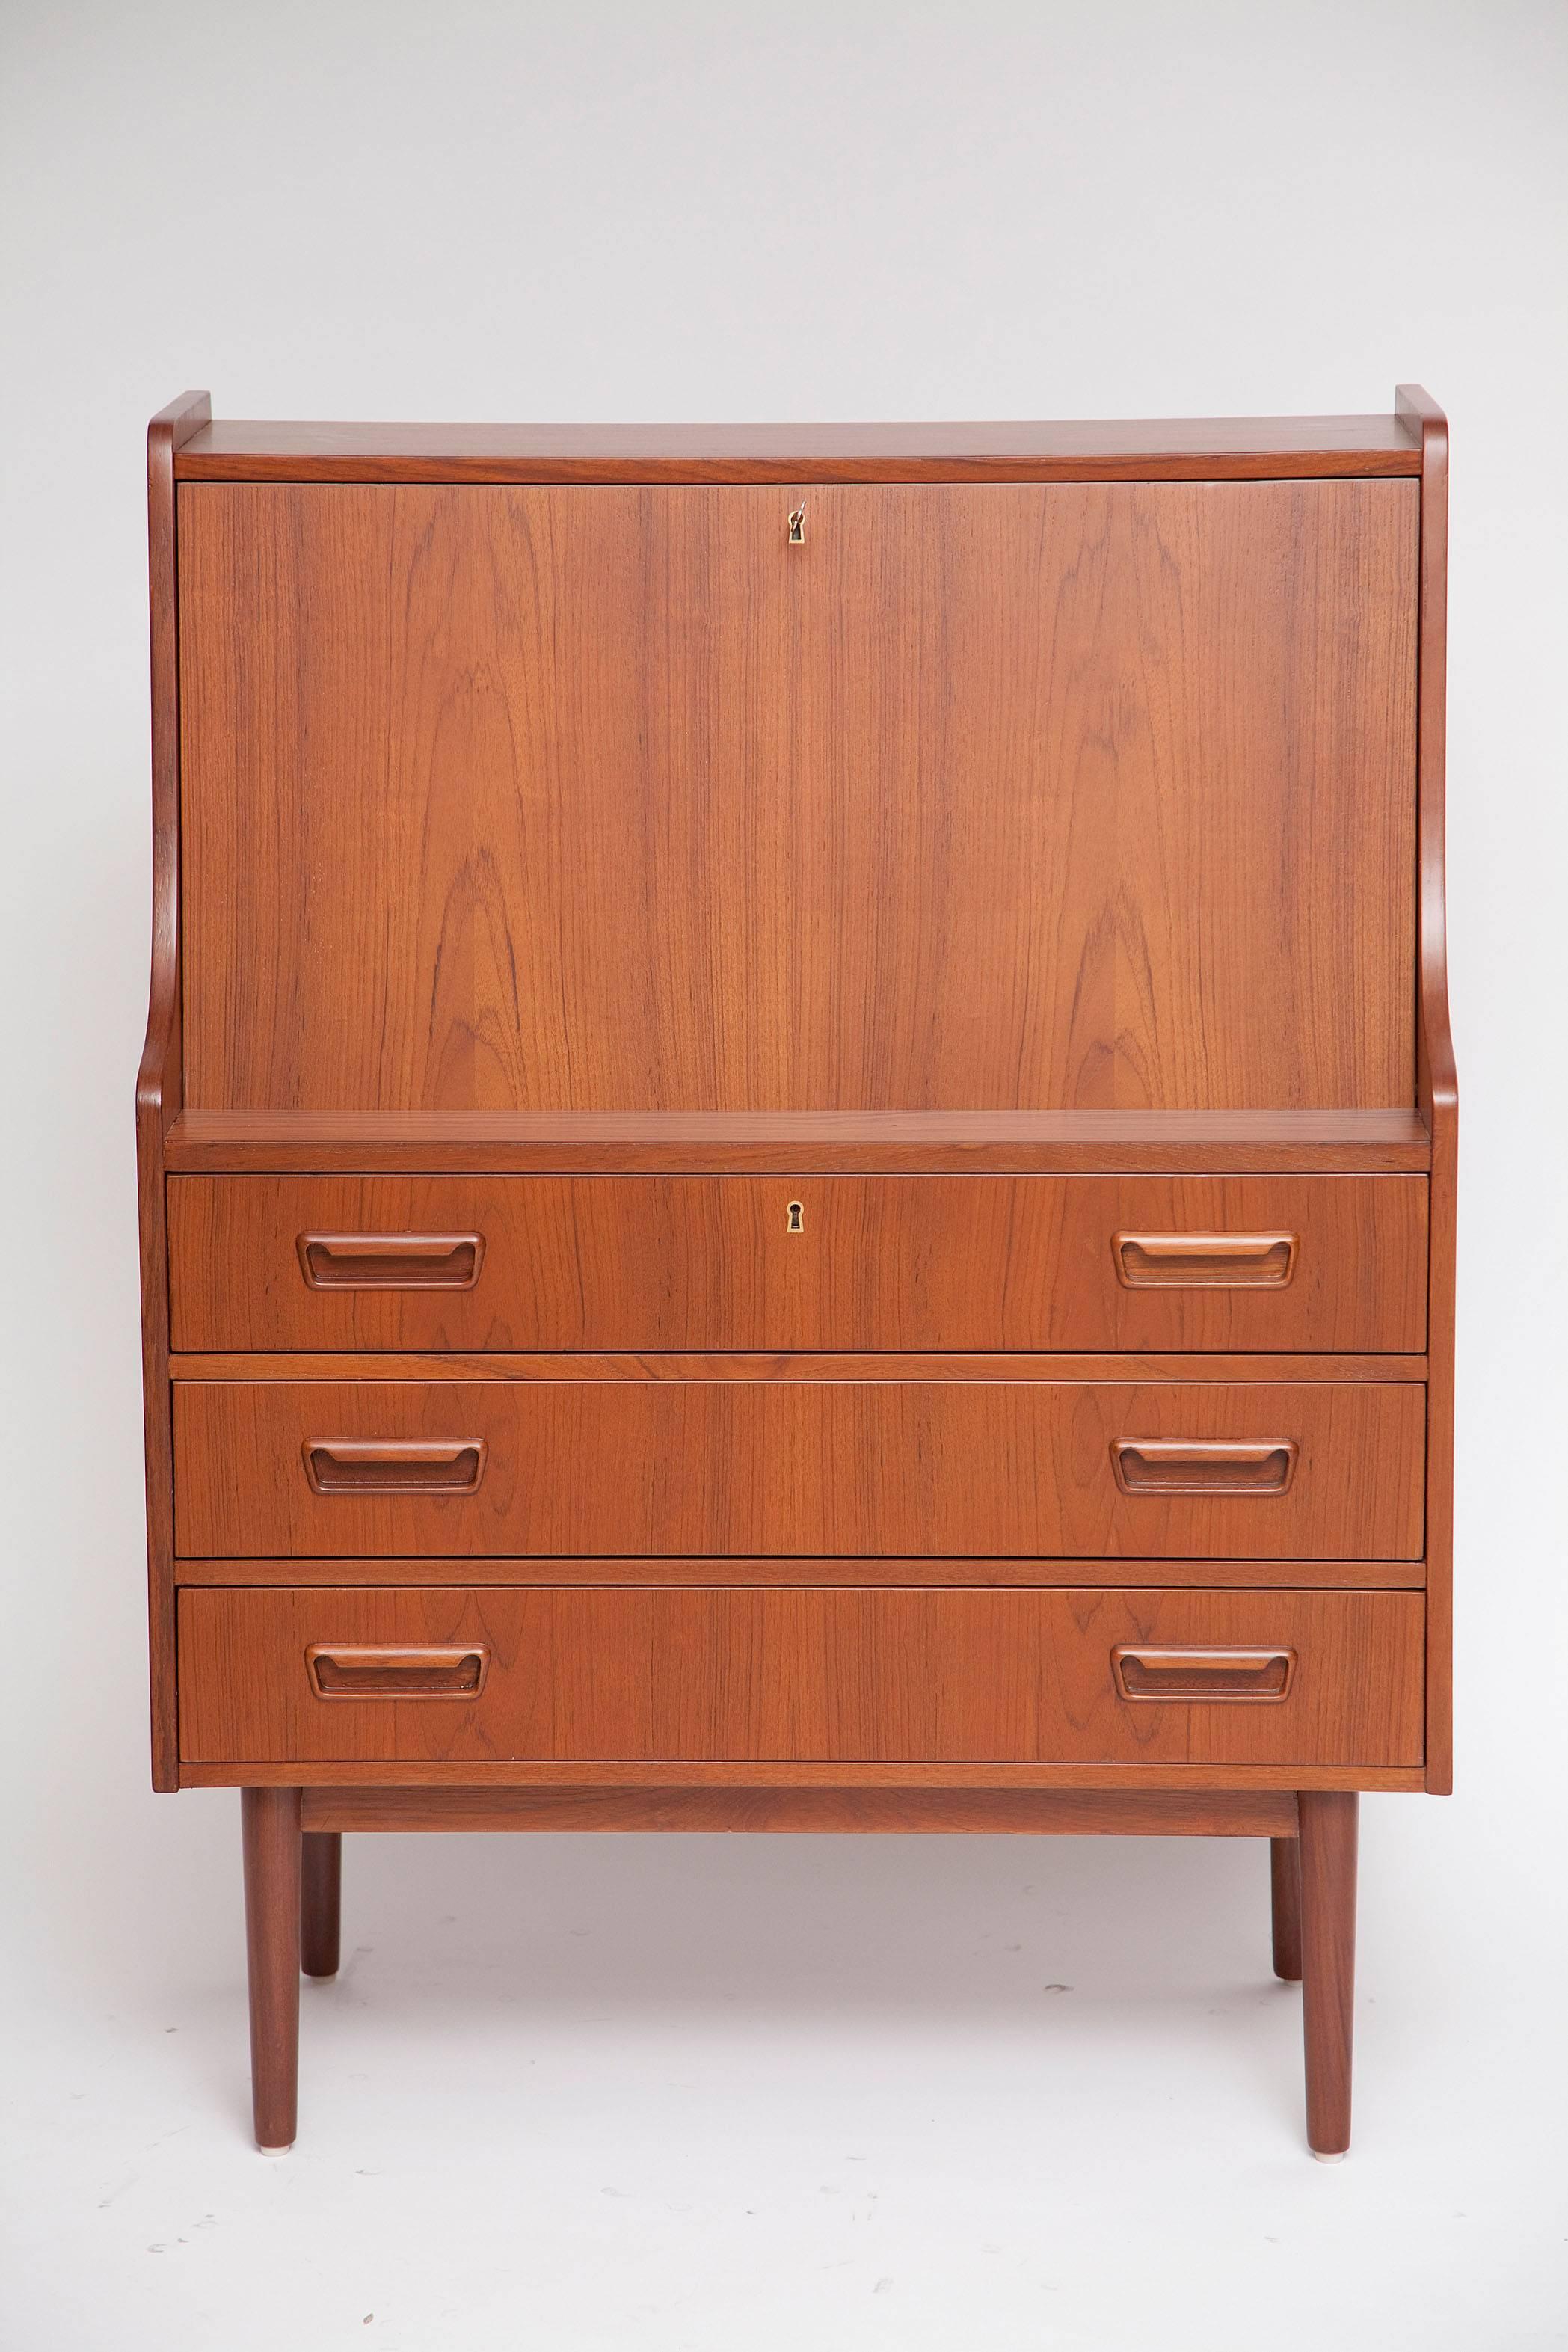 We love the practicality and small footprint of a secretary desk. This handsome 1960s version in the style of Børge Mogensen has been professionally refinished and features three large drawers below and four small drawers up top. Drop-front and top